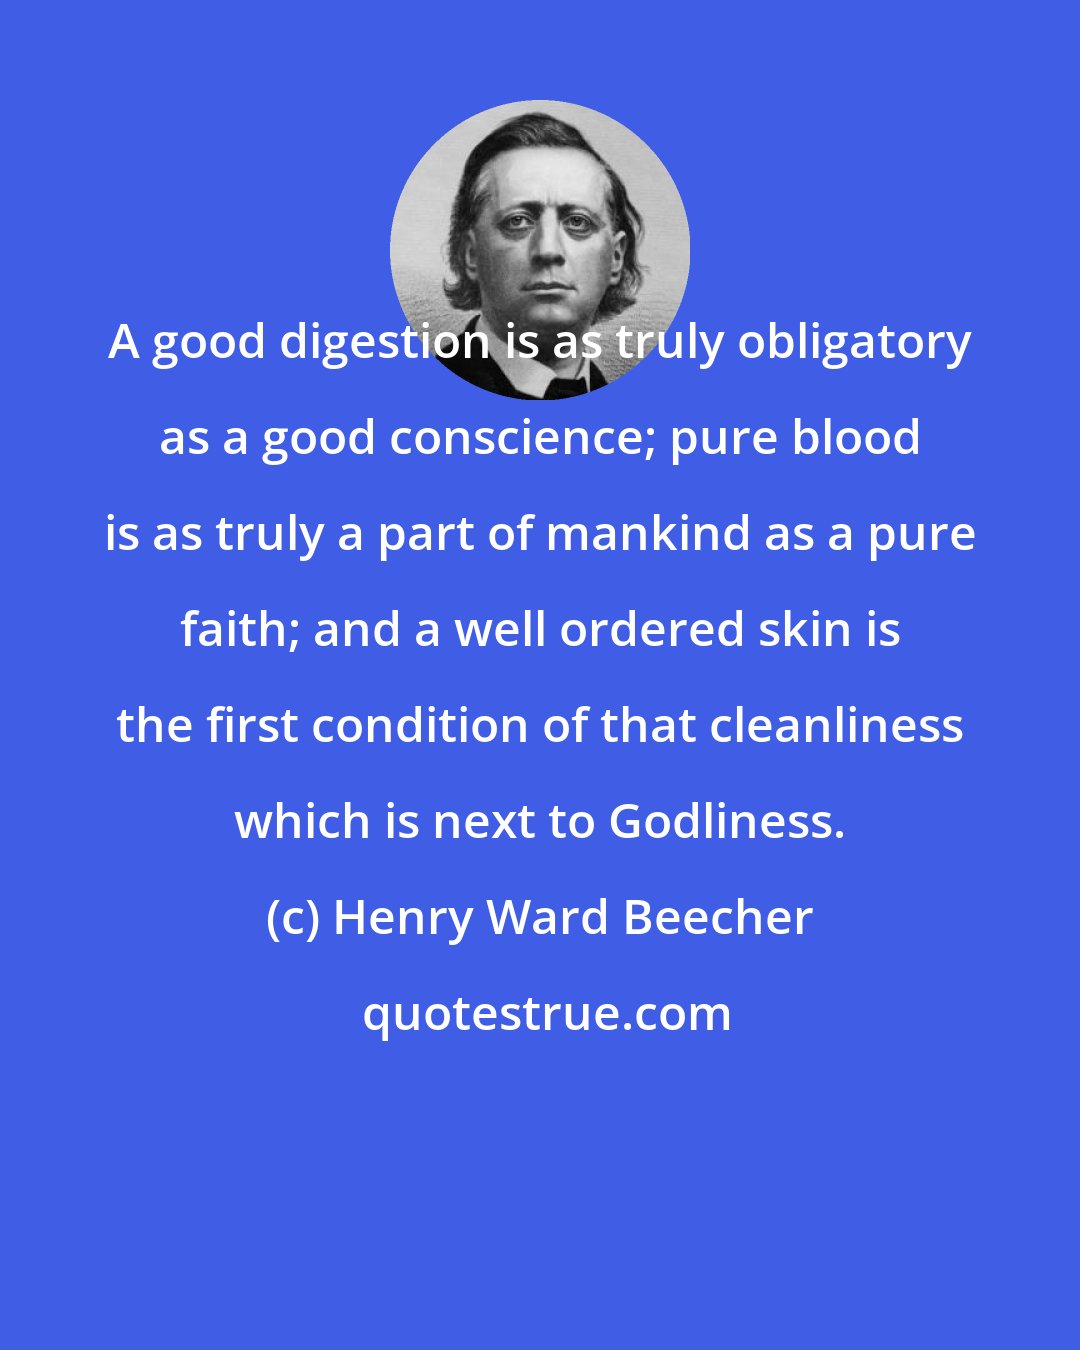 Henry Ward Beecher: A good digestion is as truly obligatory as a good conscience; pure blood is as truly a part of mankind as a pure faith; and a well ordered skin is the first condition of that cleanliness which is next to Godliness.